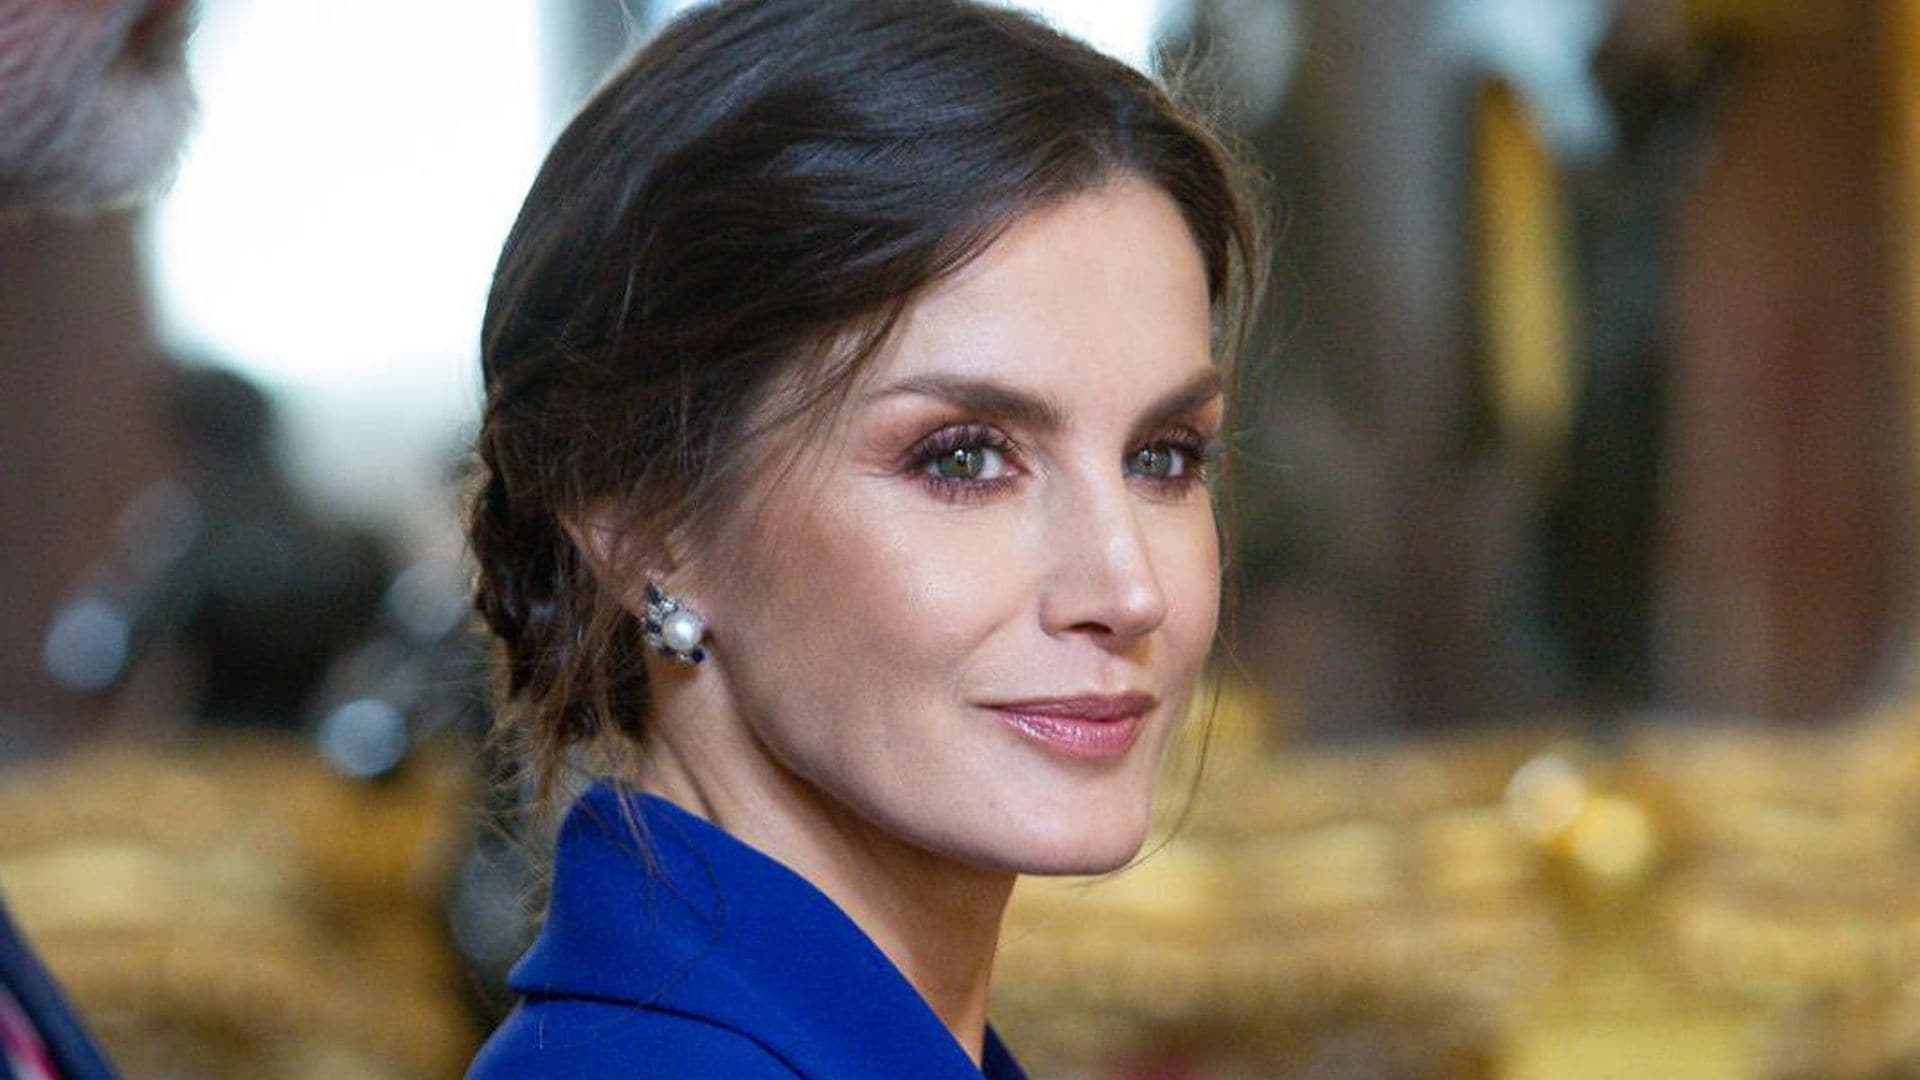 Queen Letizia kicks off New Year on a stylish note